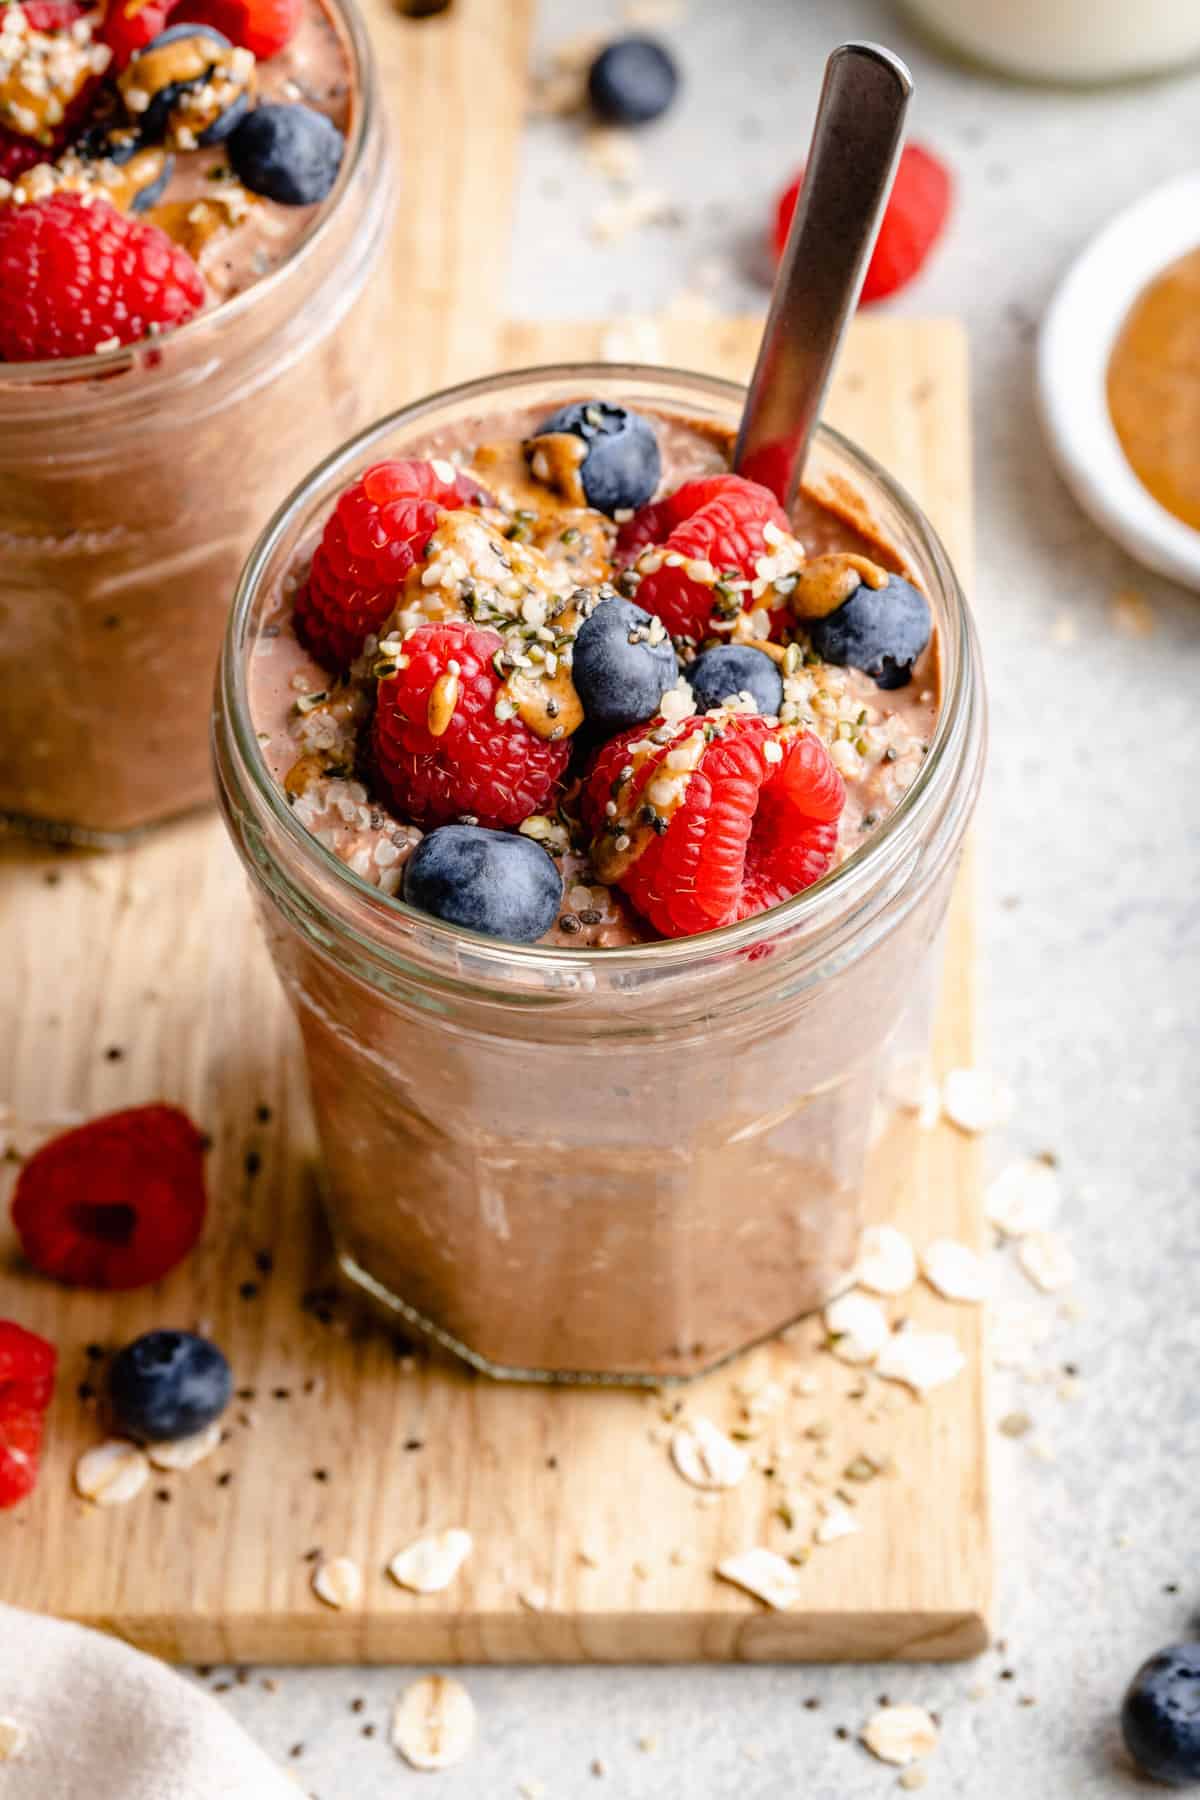 Chocolate Overnight Oats - All the Healthy Things